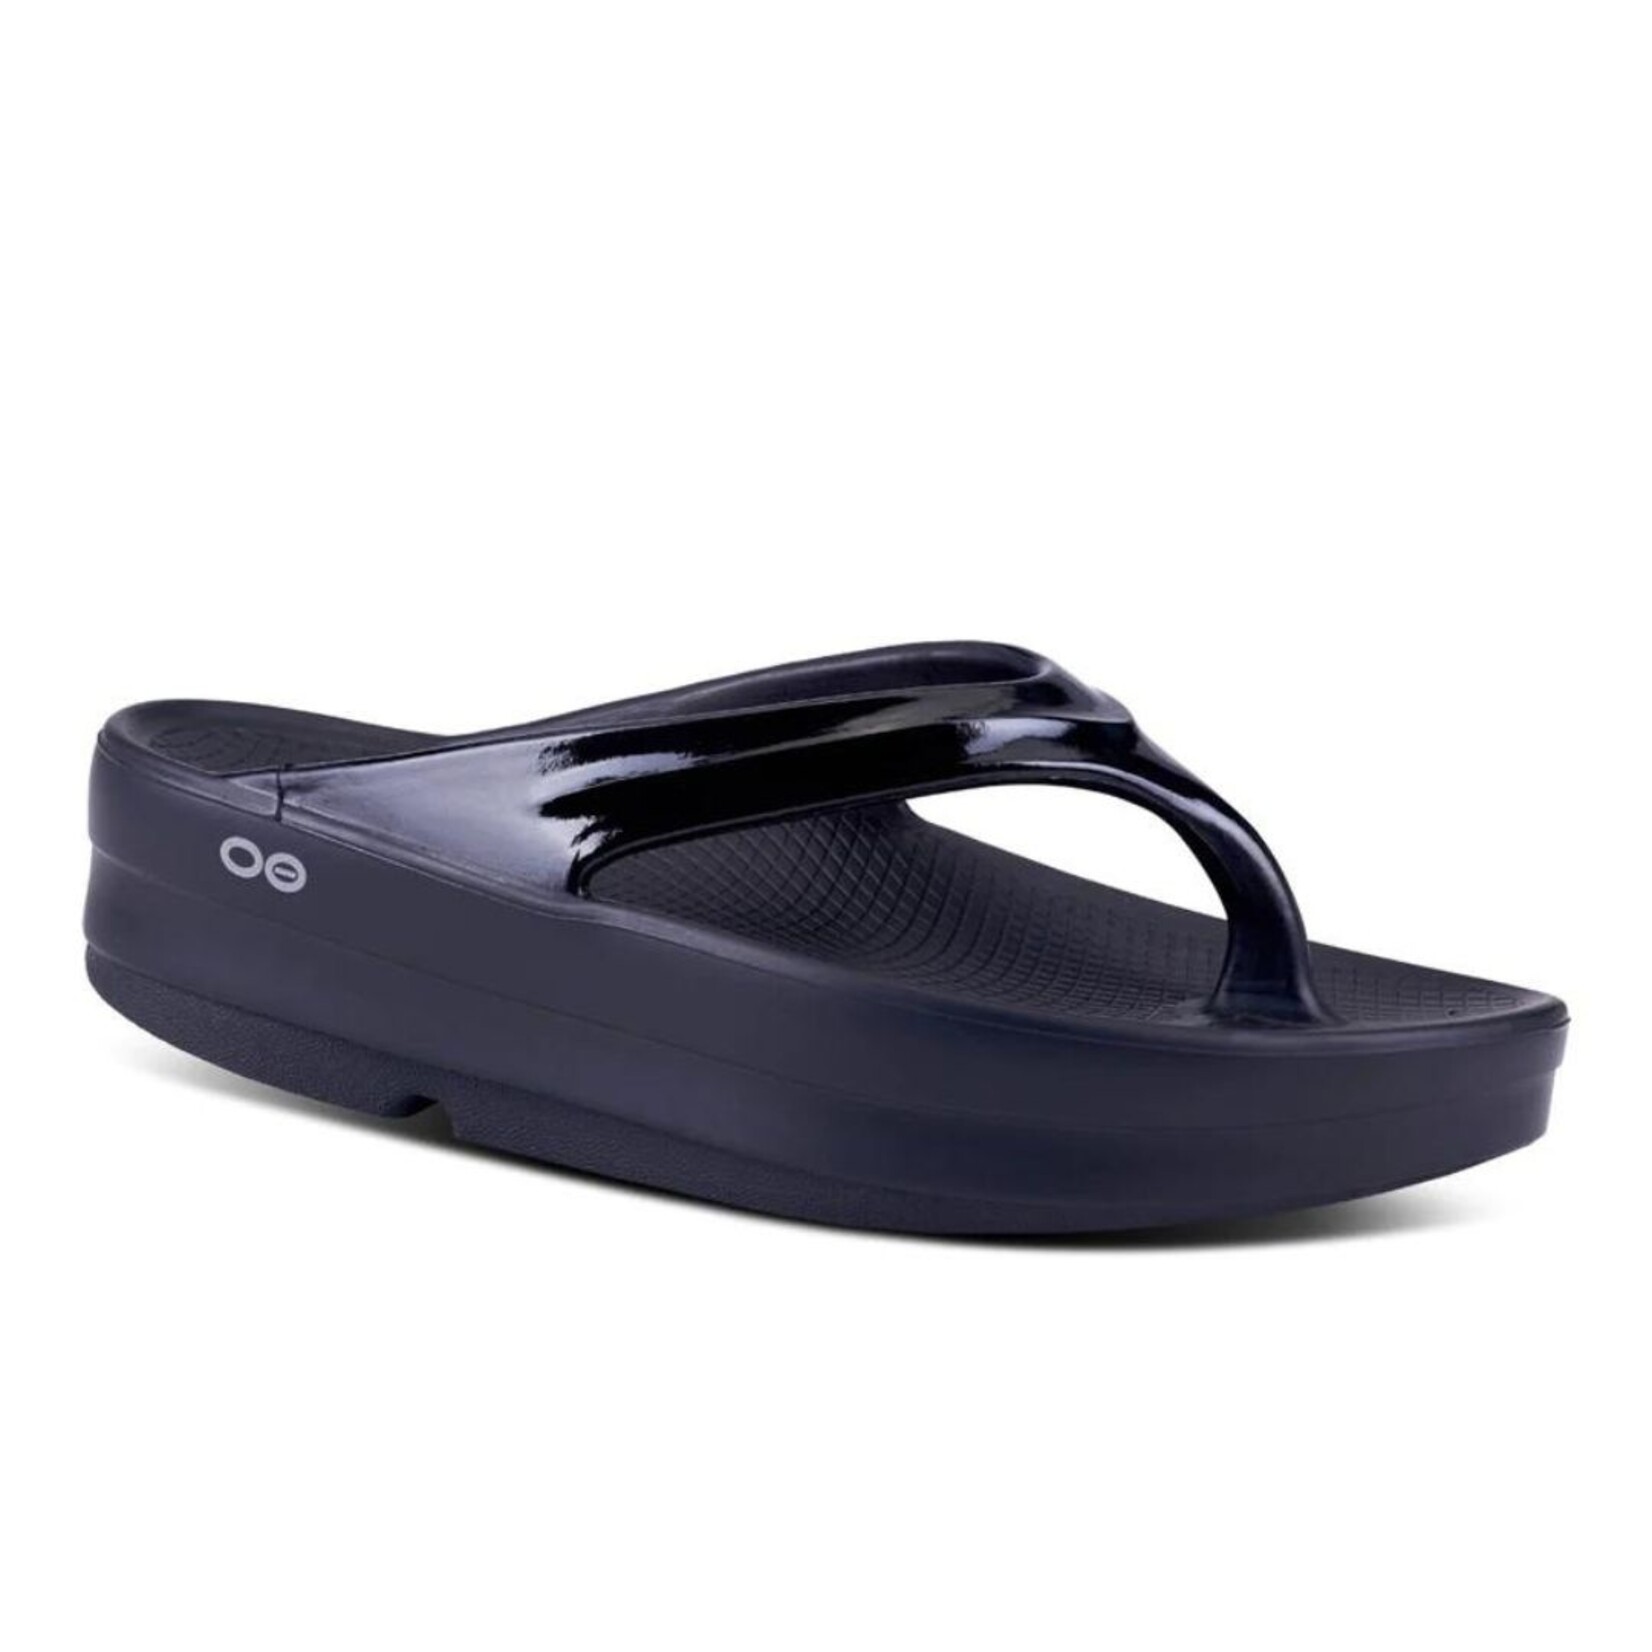 Oofos Oofos 1410 OOmega Thong Women's Sandals